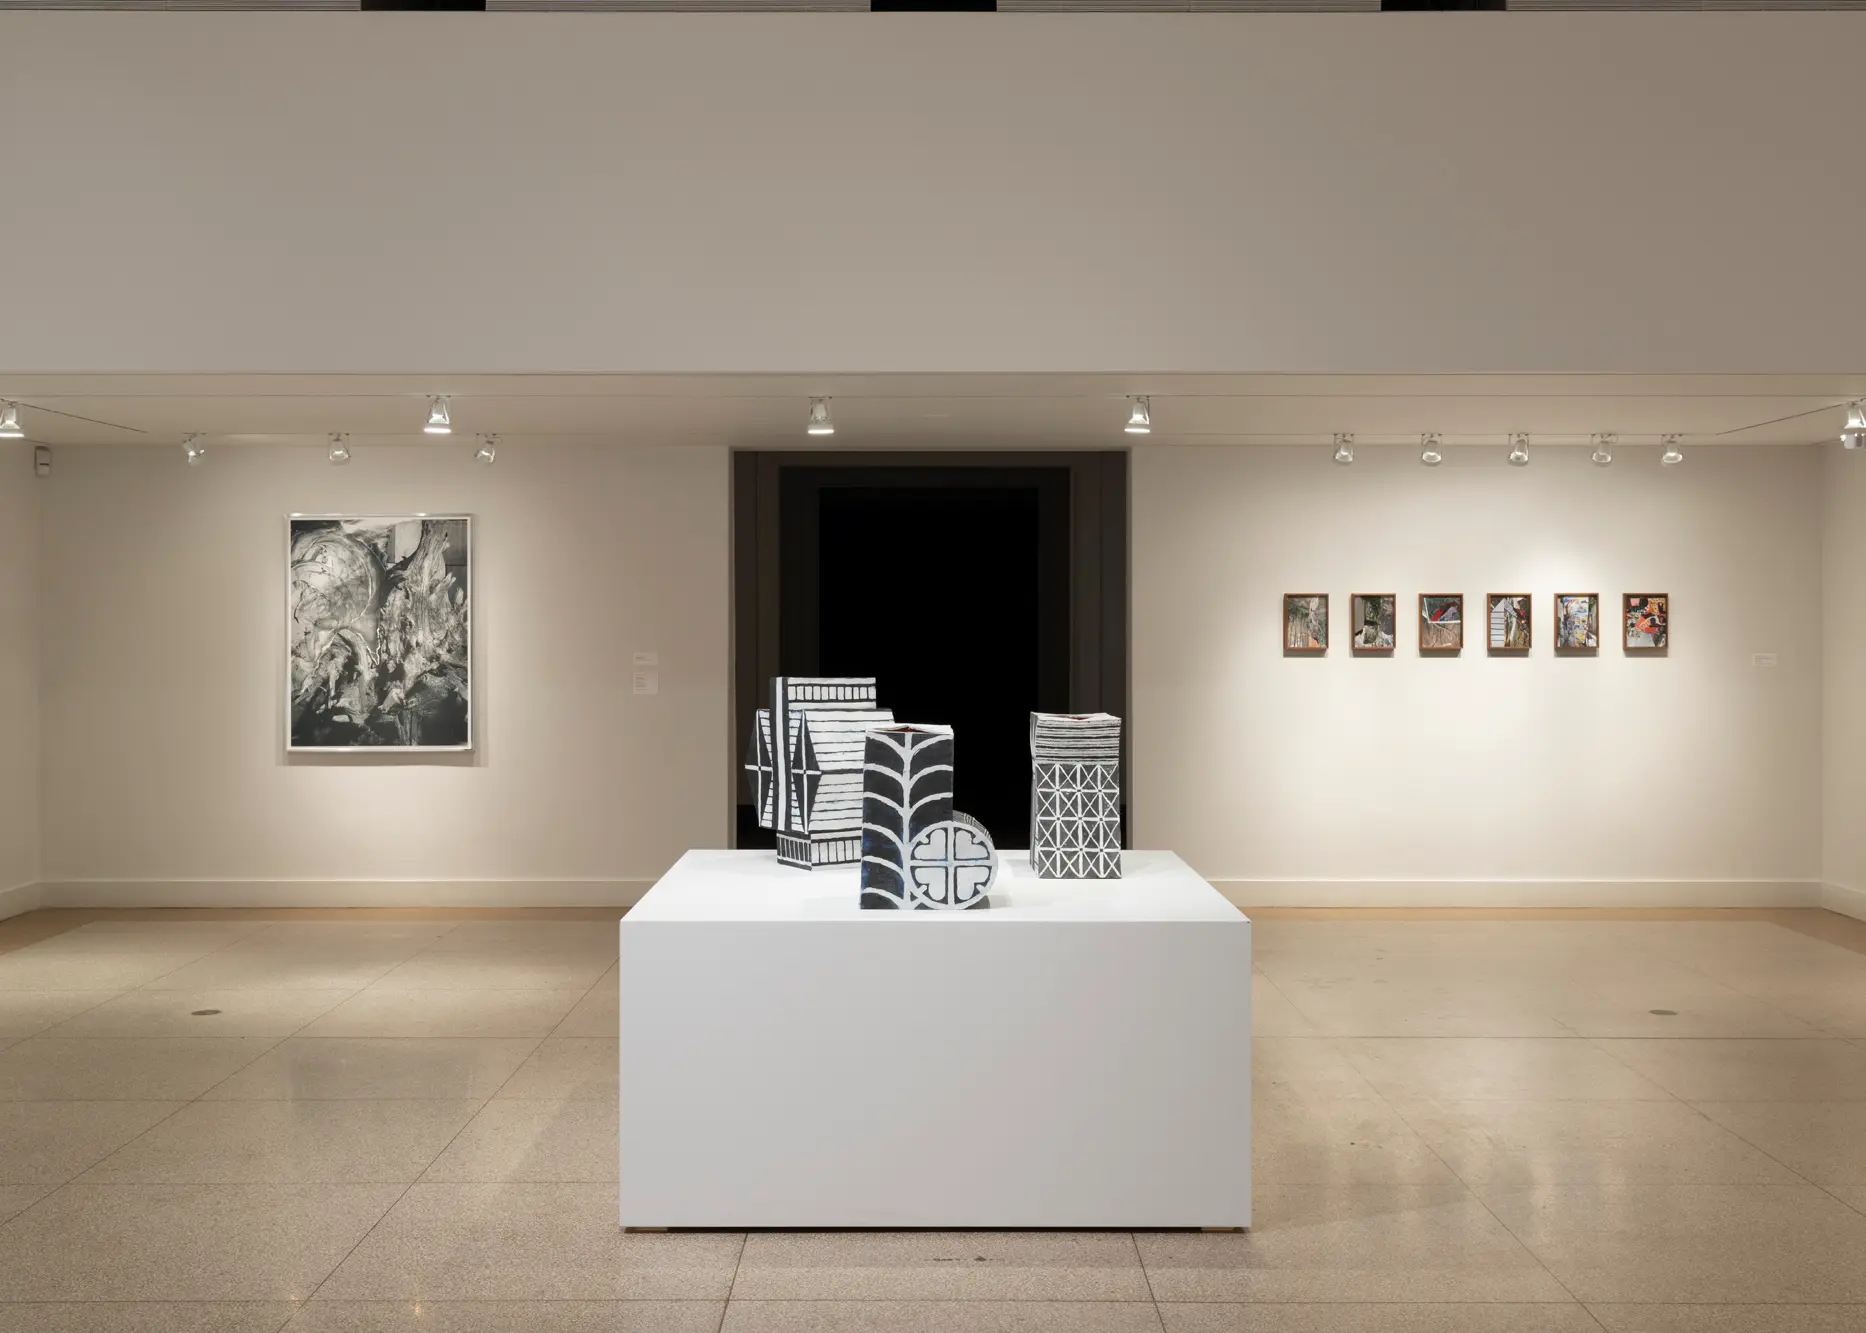 Three black and white sculptures sit on a large white pedestal at the center of a gallery room. On the wall behind the sculptures, a large abstract work on paper is hung to the left of a series of six small, framed works.